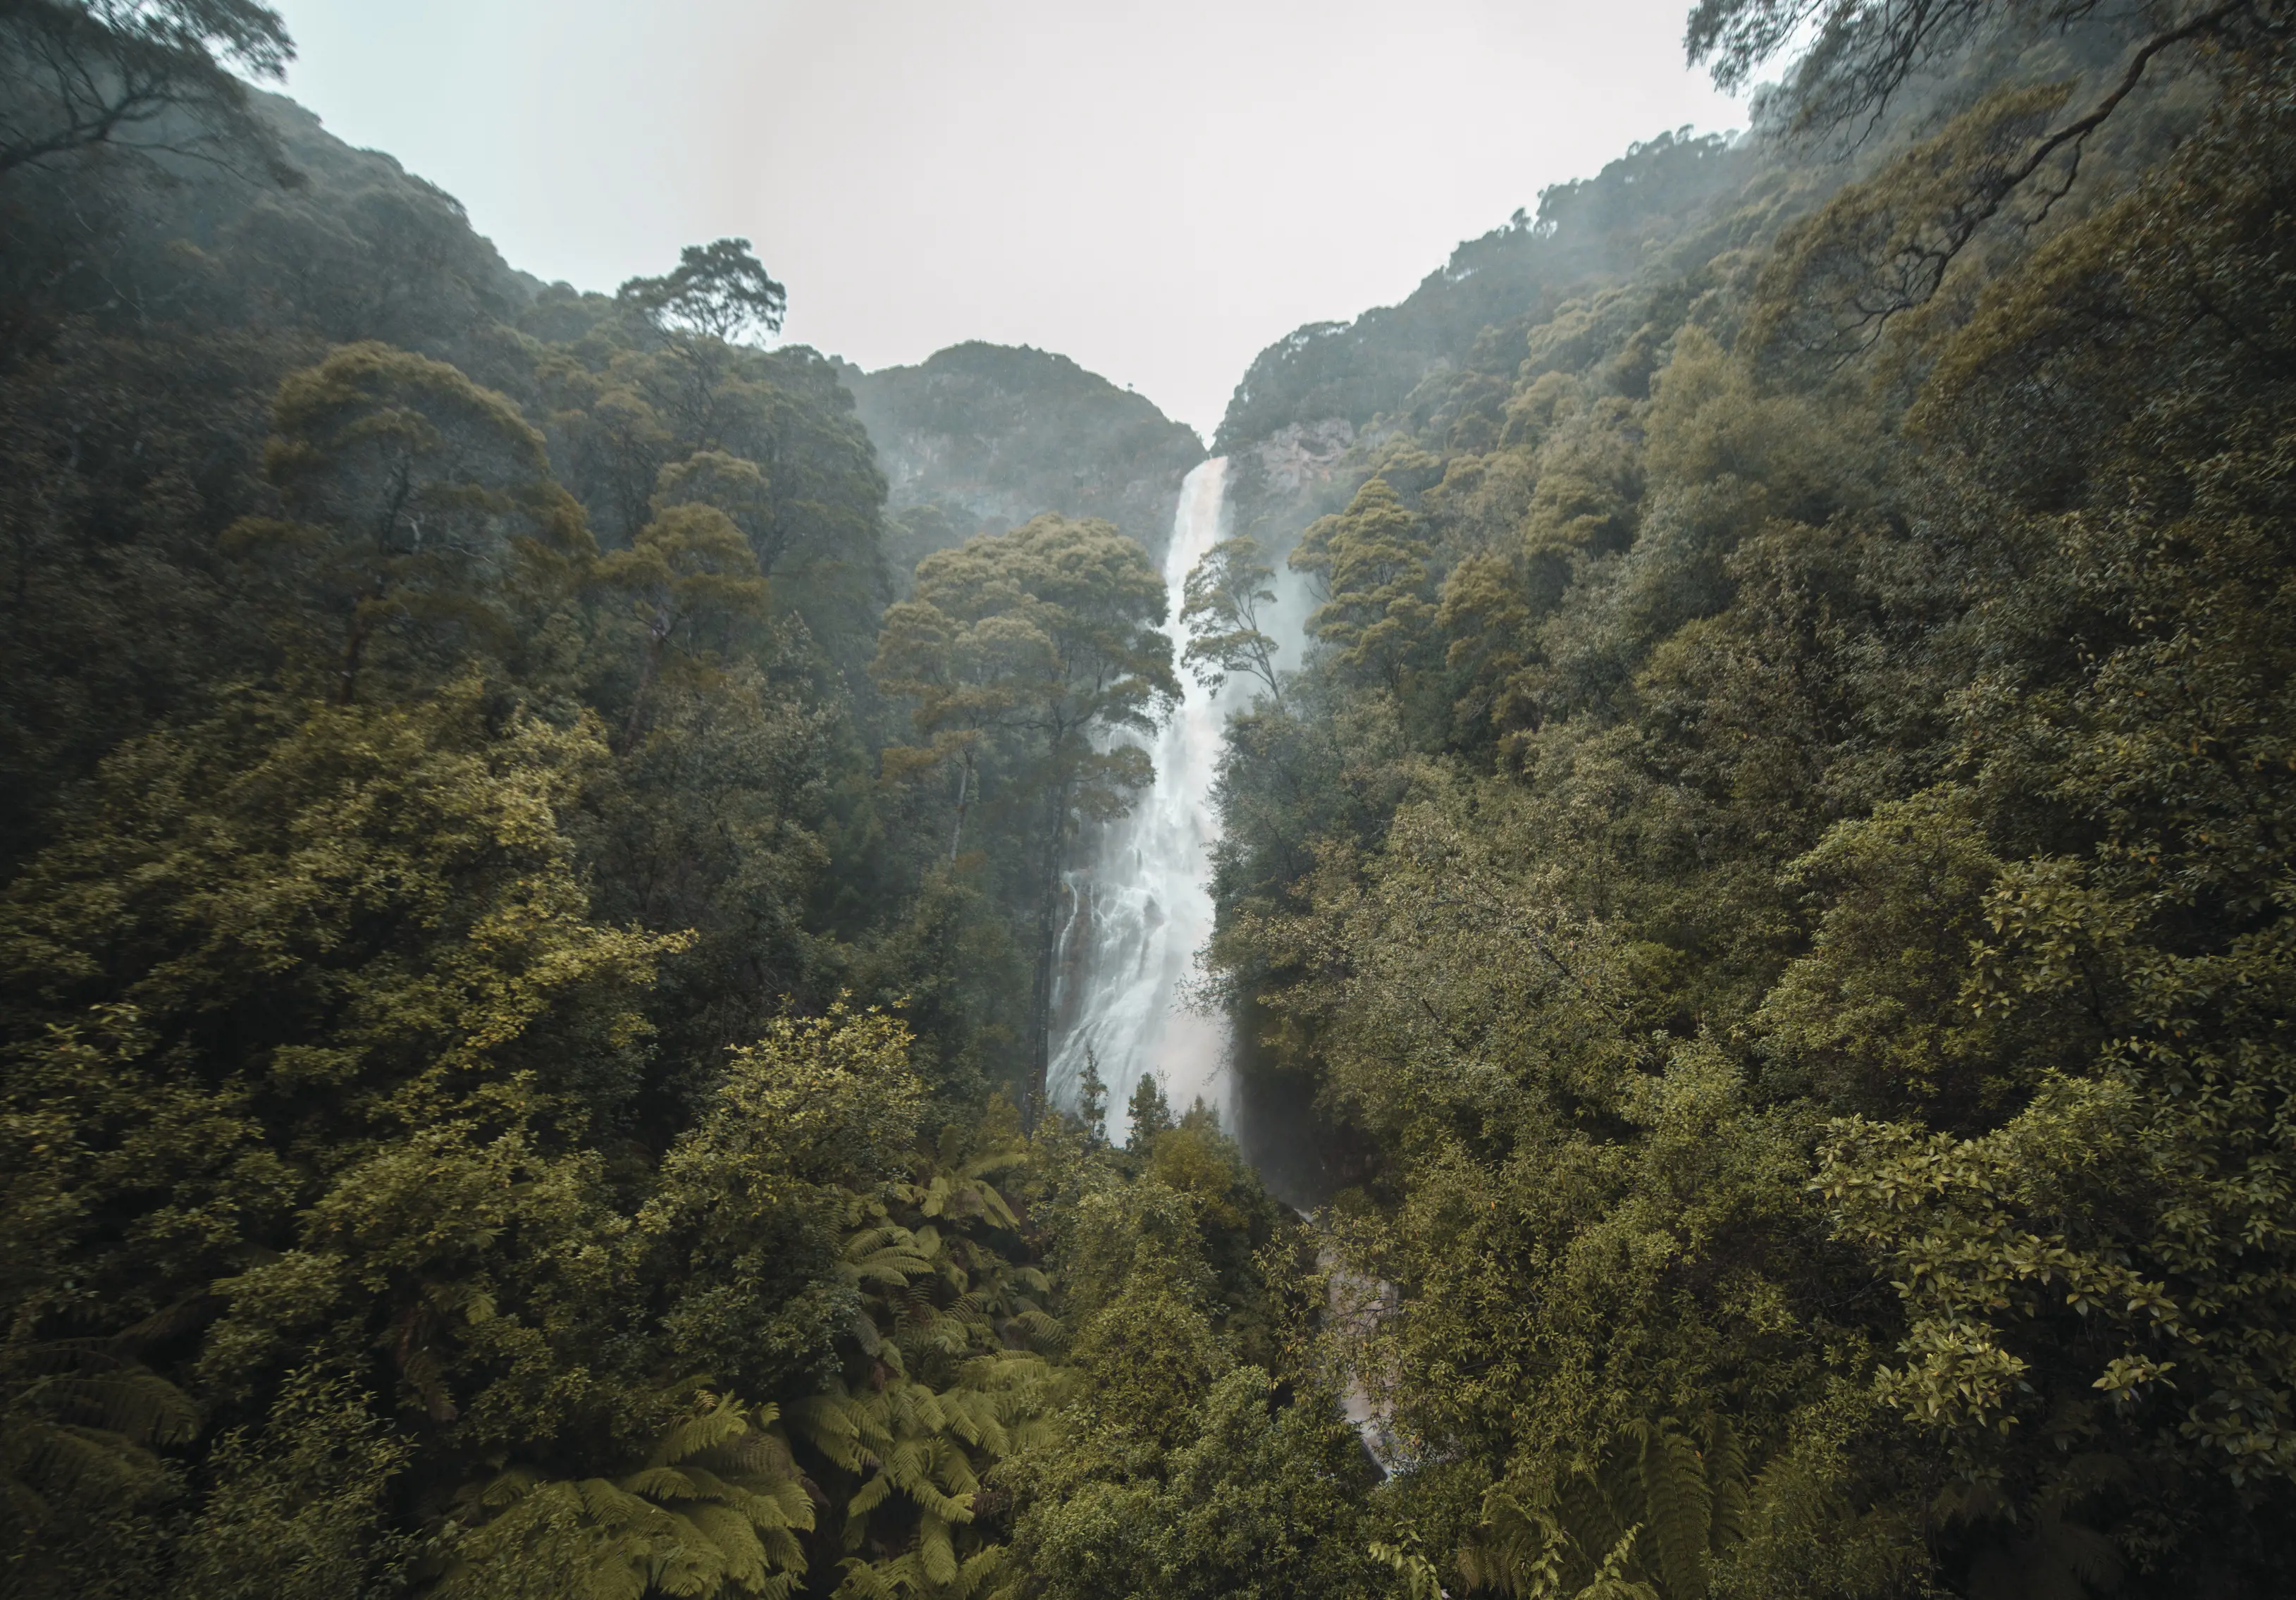 Tasmania's highest waterfall at Montezuma Falls, the waterfall is surrounded by lush, tall trees. 